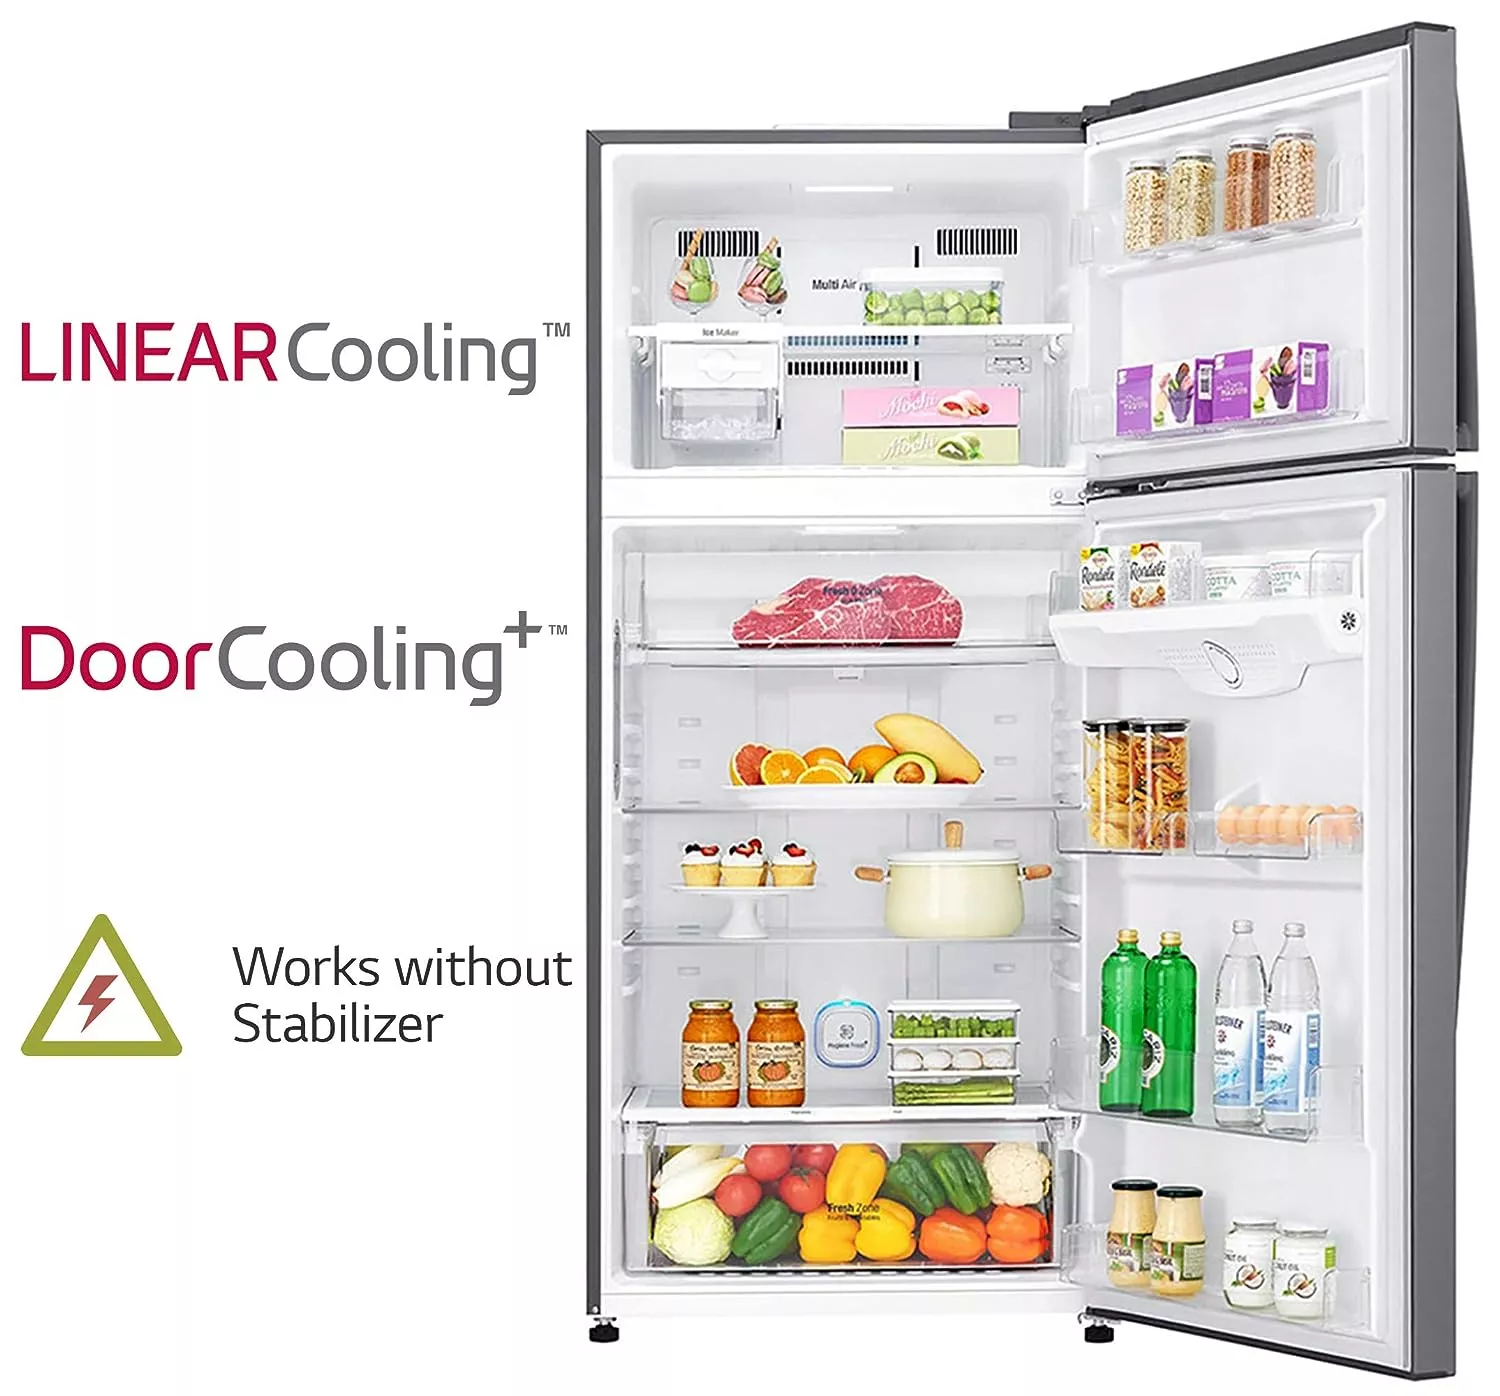 Best LG Refrigerator 516 L Frost Free Double Door 3-Star - Linear Cooling by take-product.com